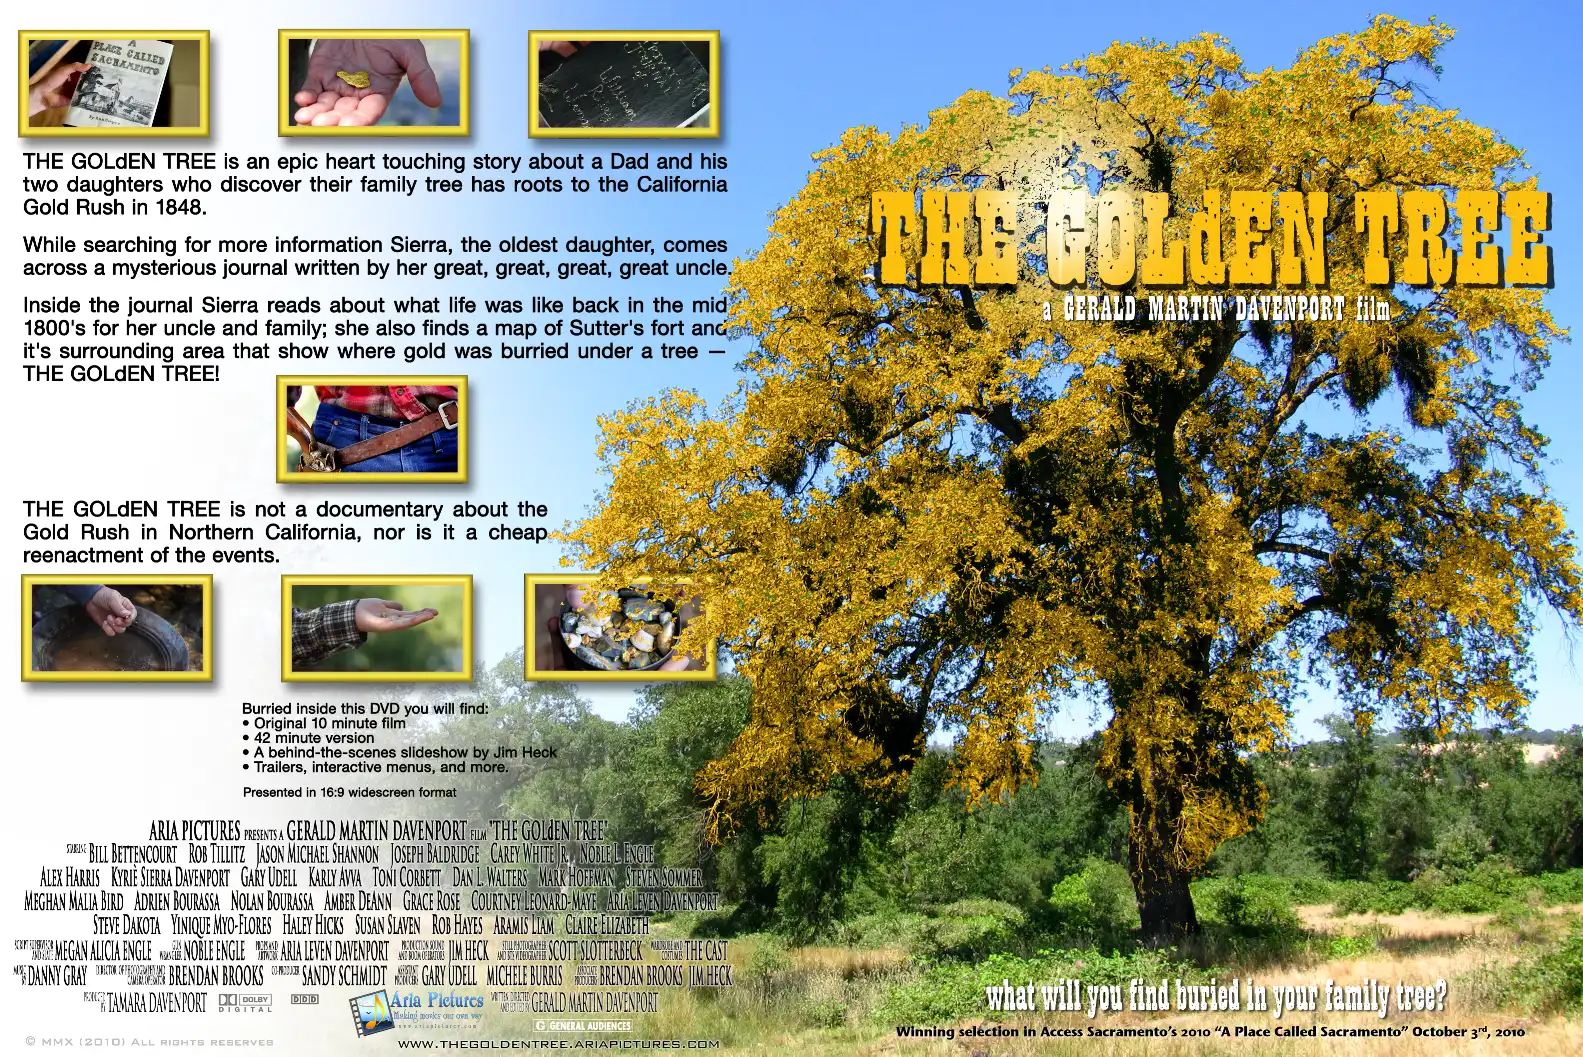 The THE GOLdEN TREE (2010) DVD Amaray Keep Case cover art.